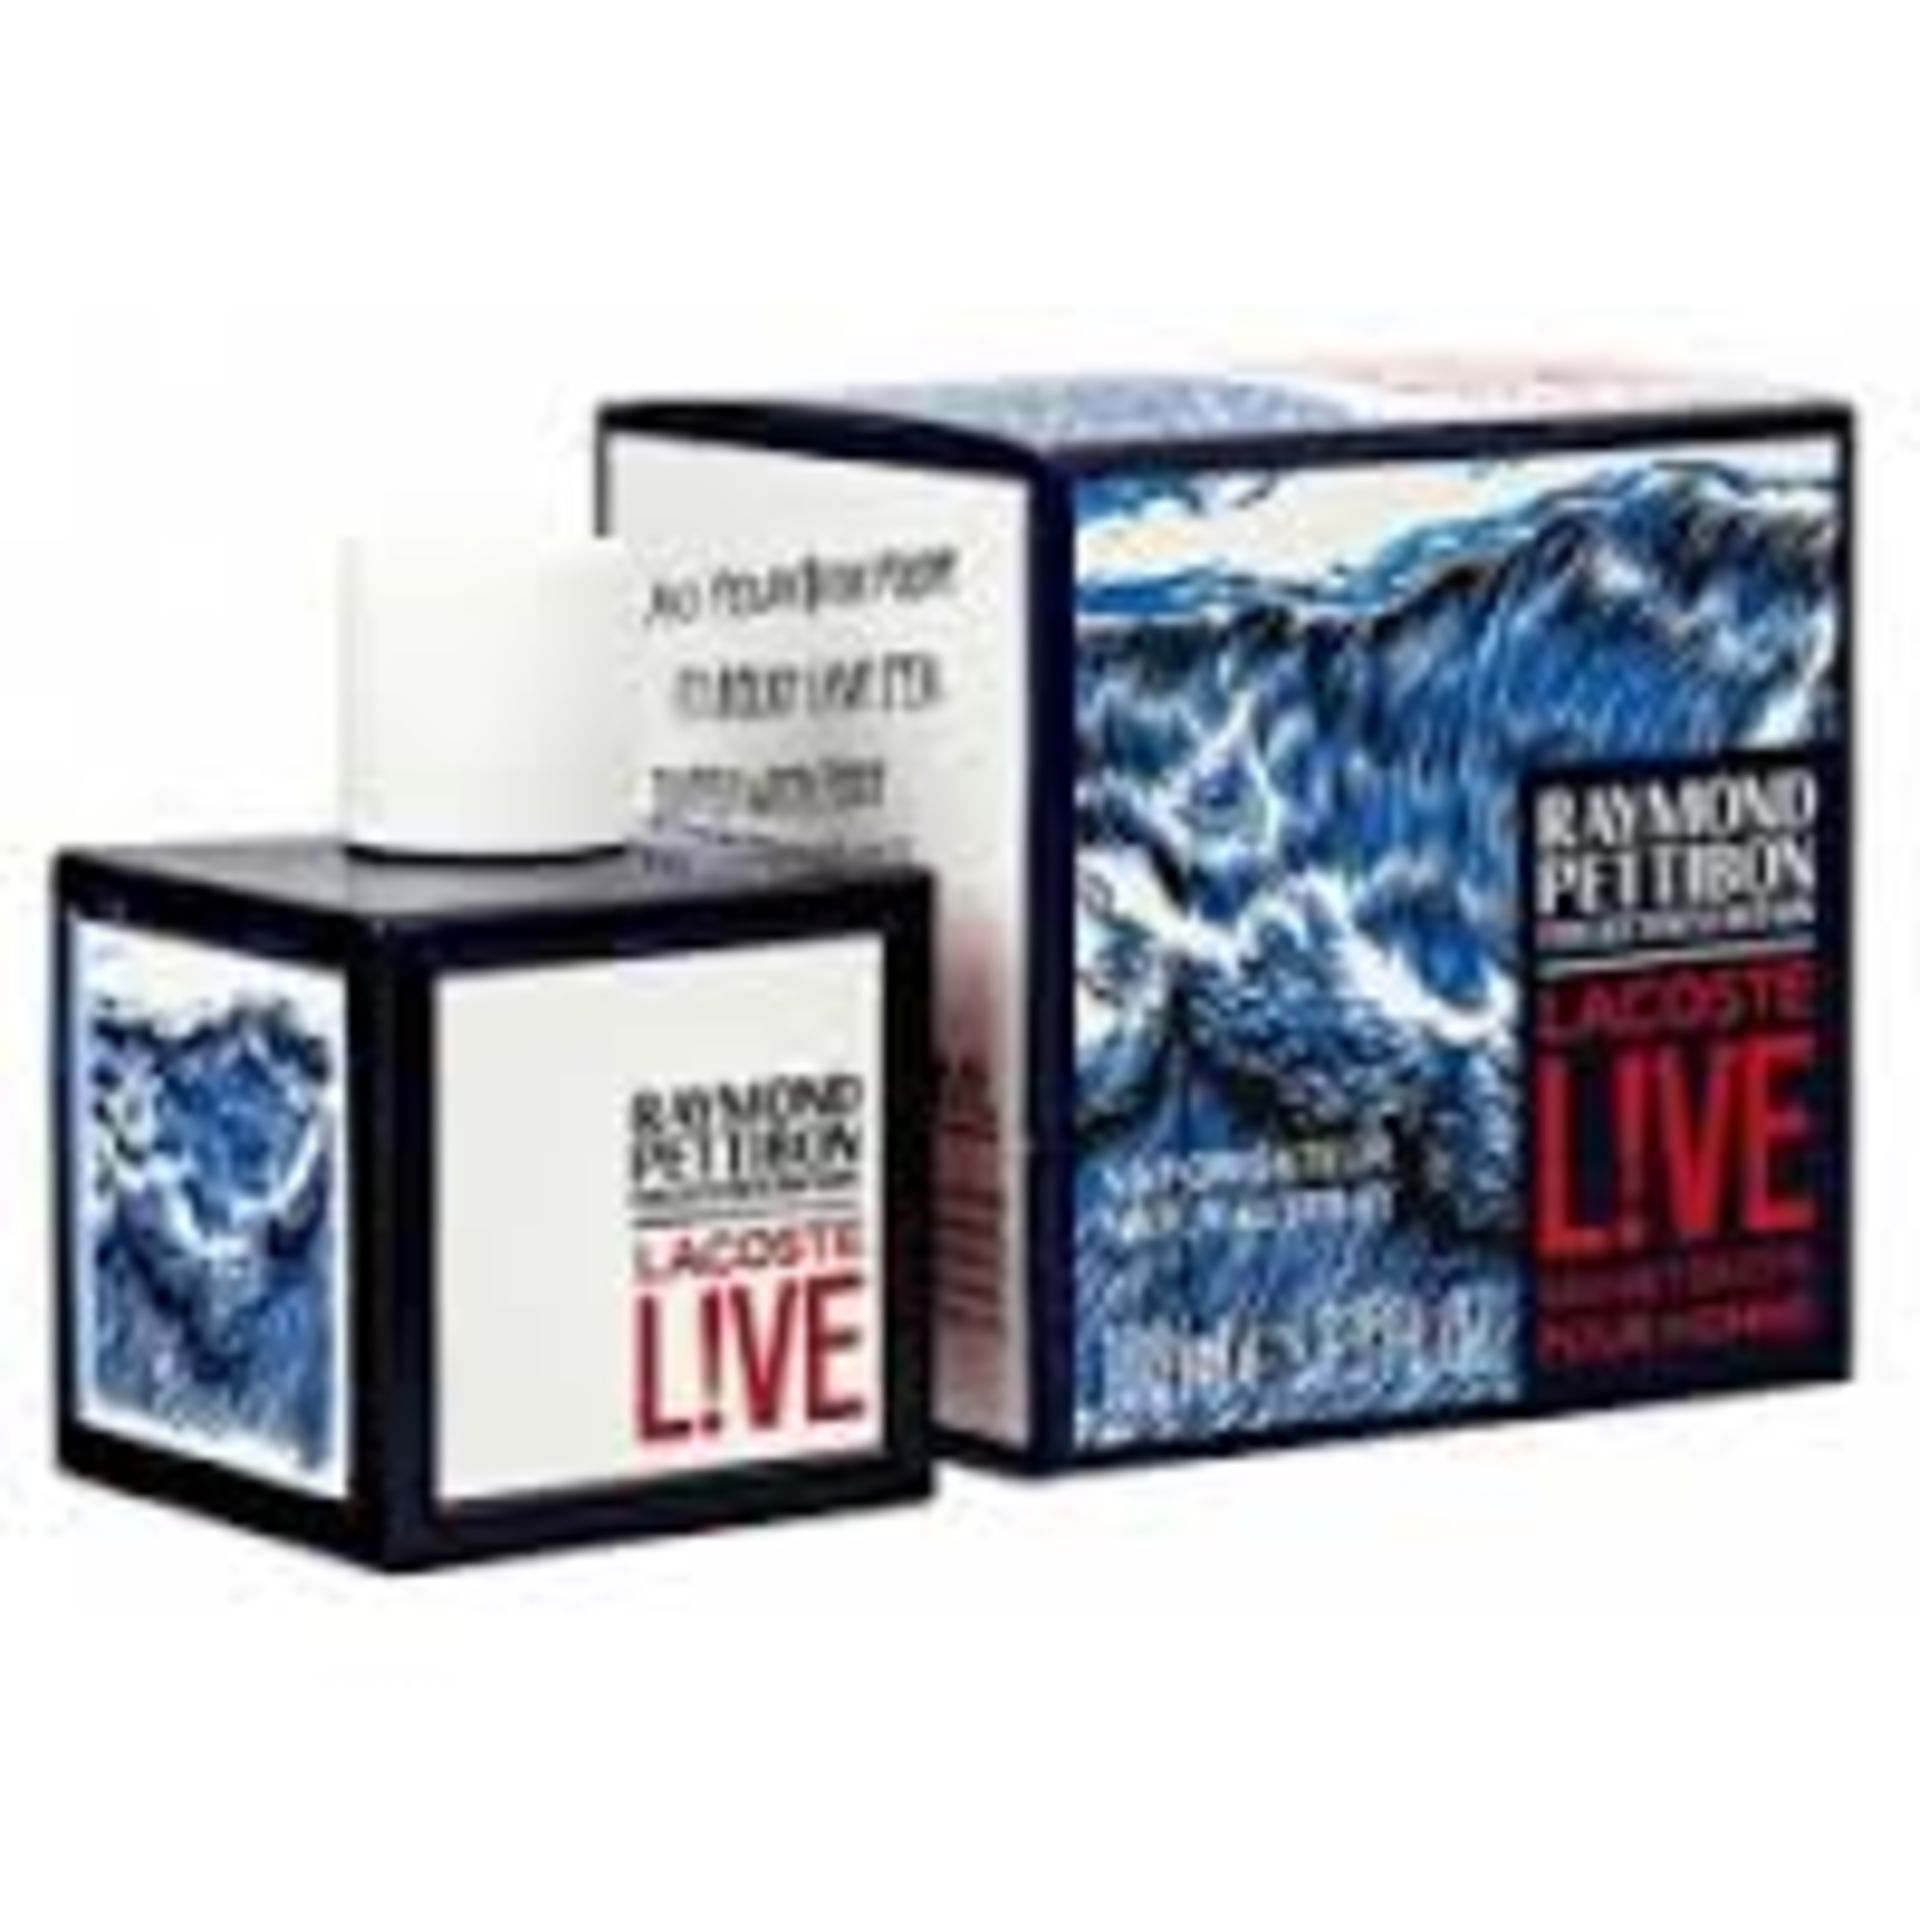 V Brand New Lacoste Live Raymond Pettibon Collector's Edition EDT Pour Homme, Superdrug price £47